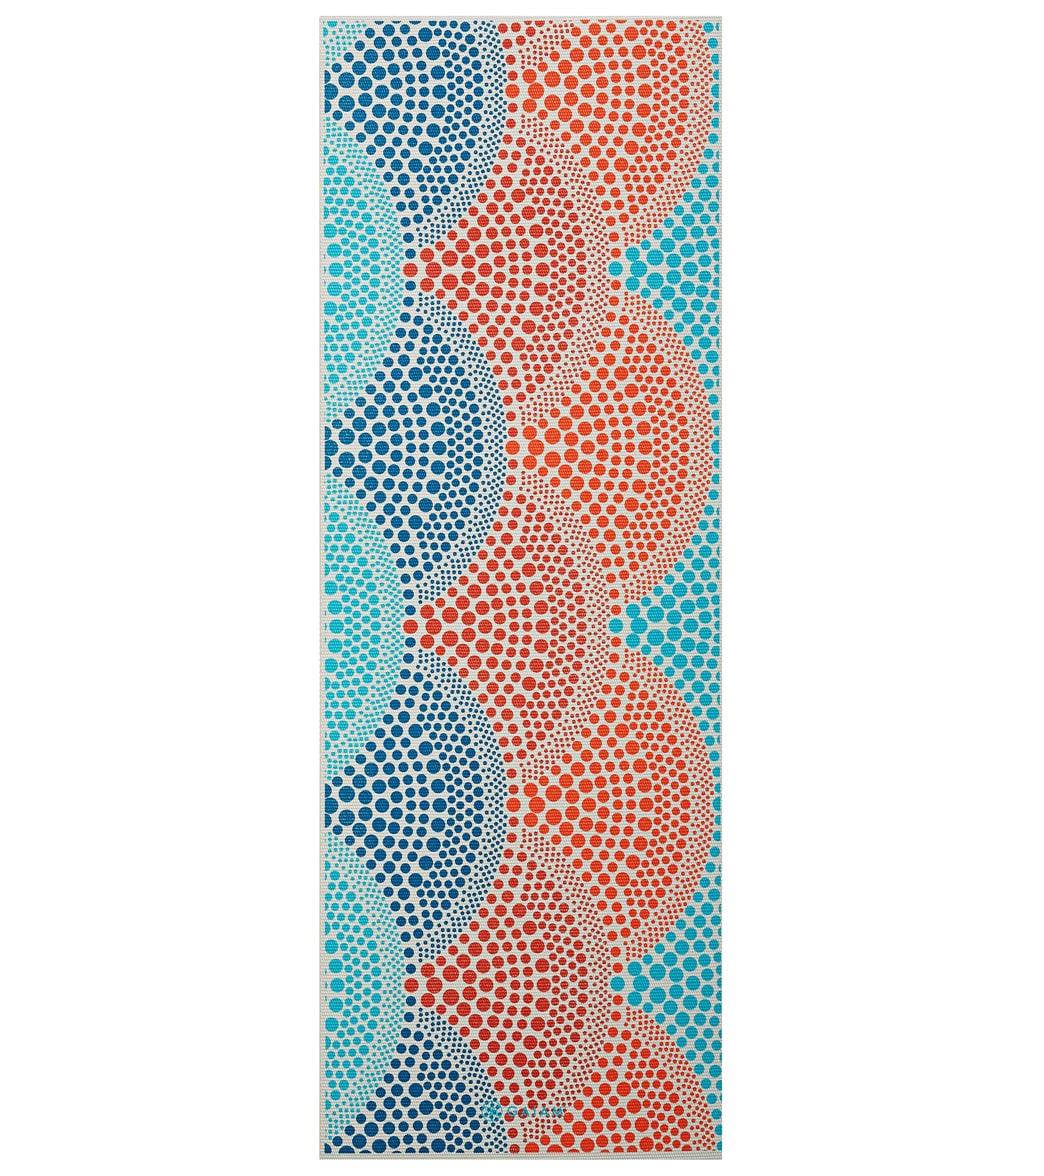 Extra Large Yoga Mat (7mm) - Extra Large Yoga Mats by Gaiam